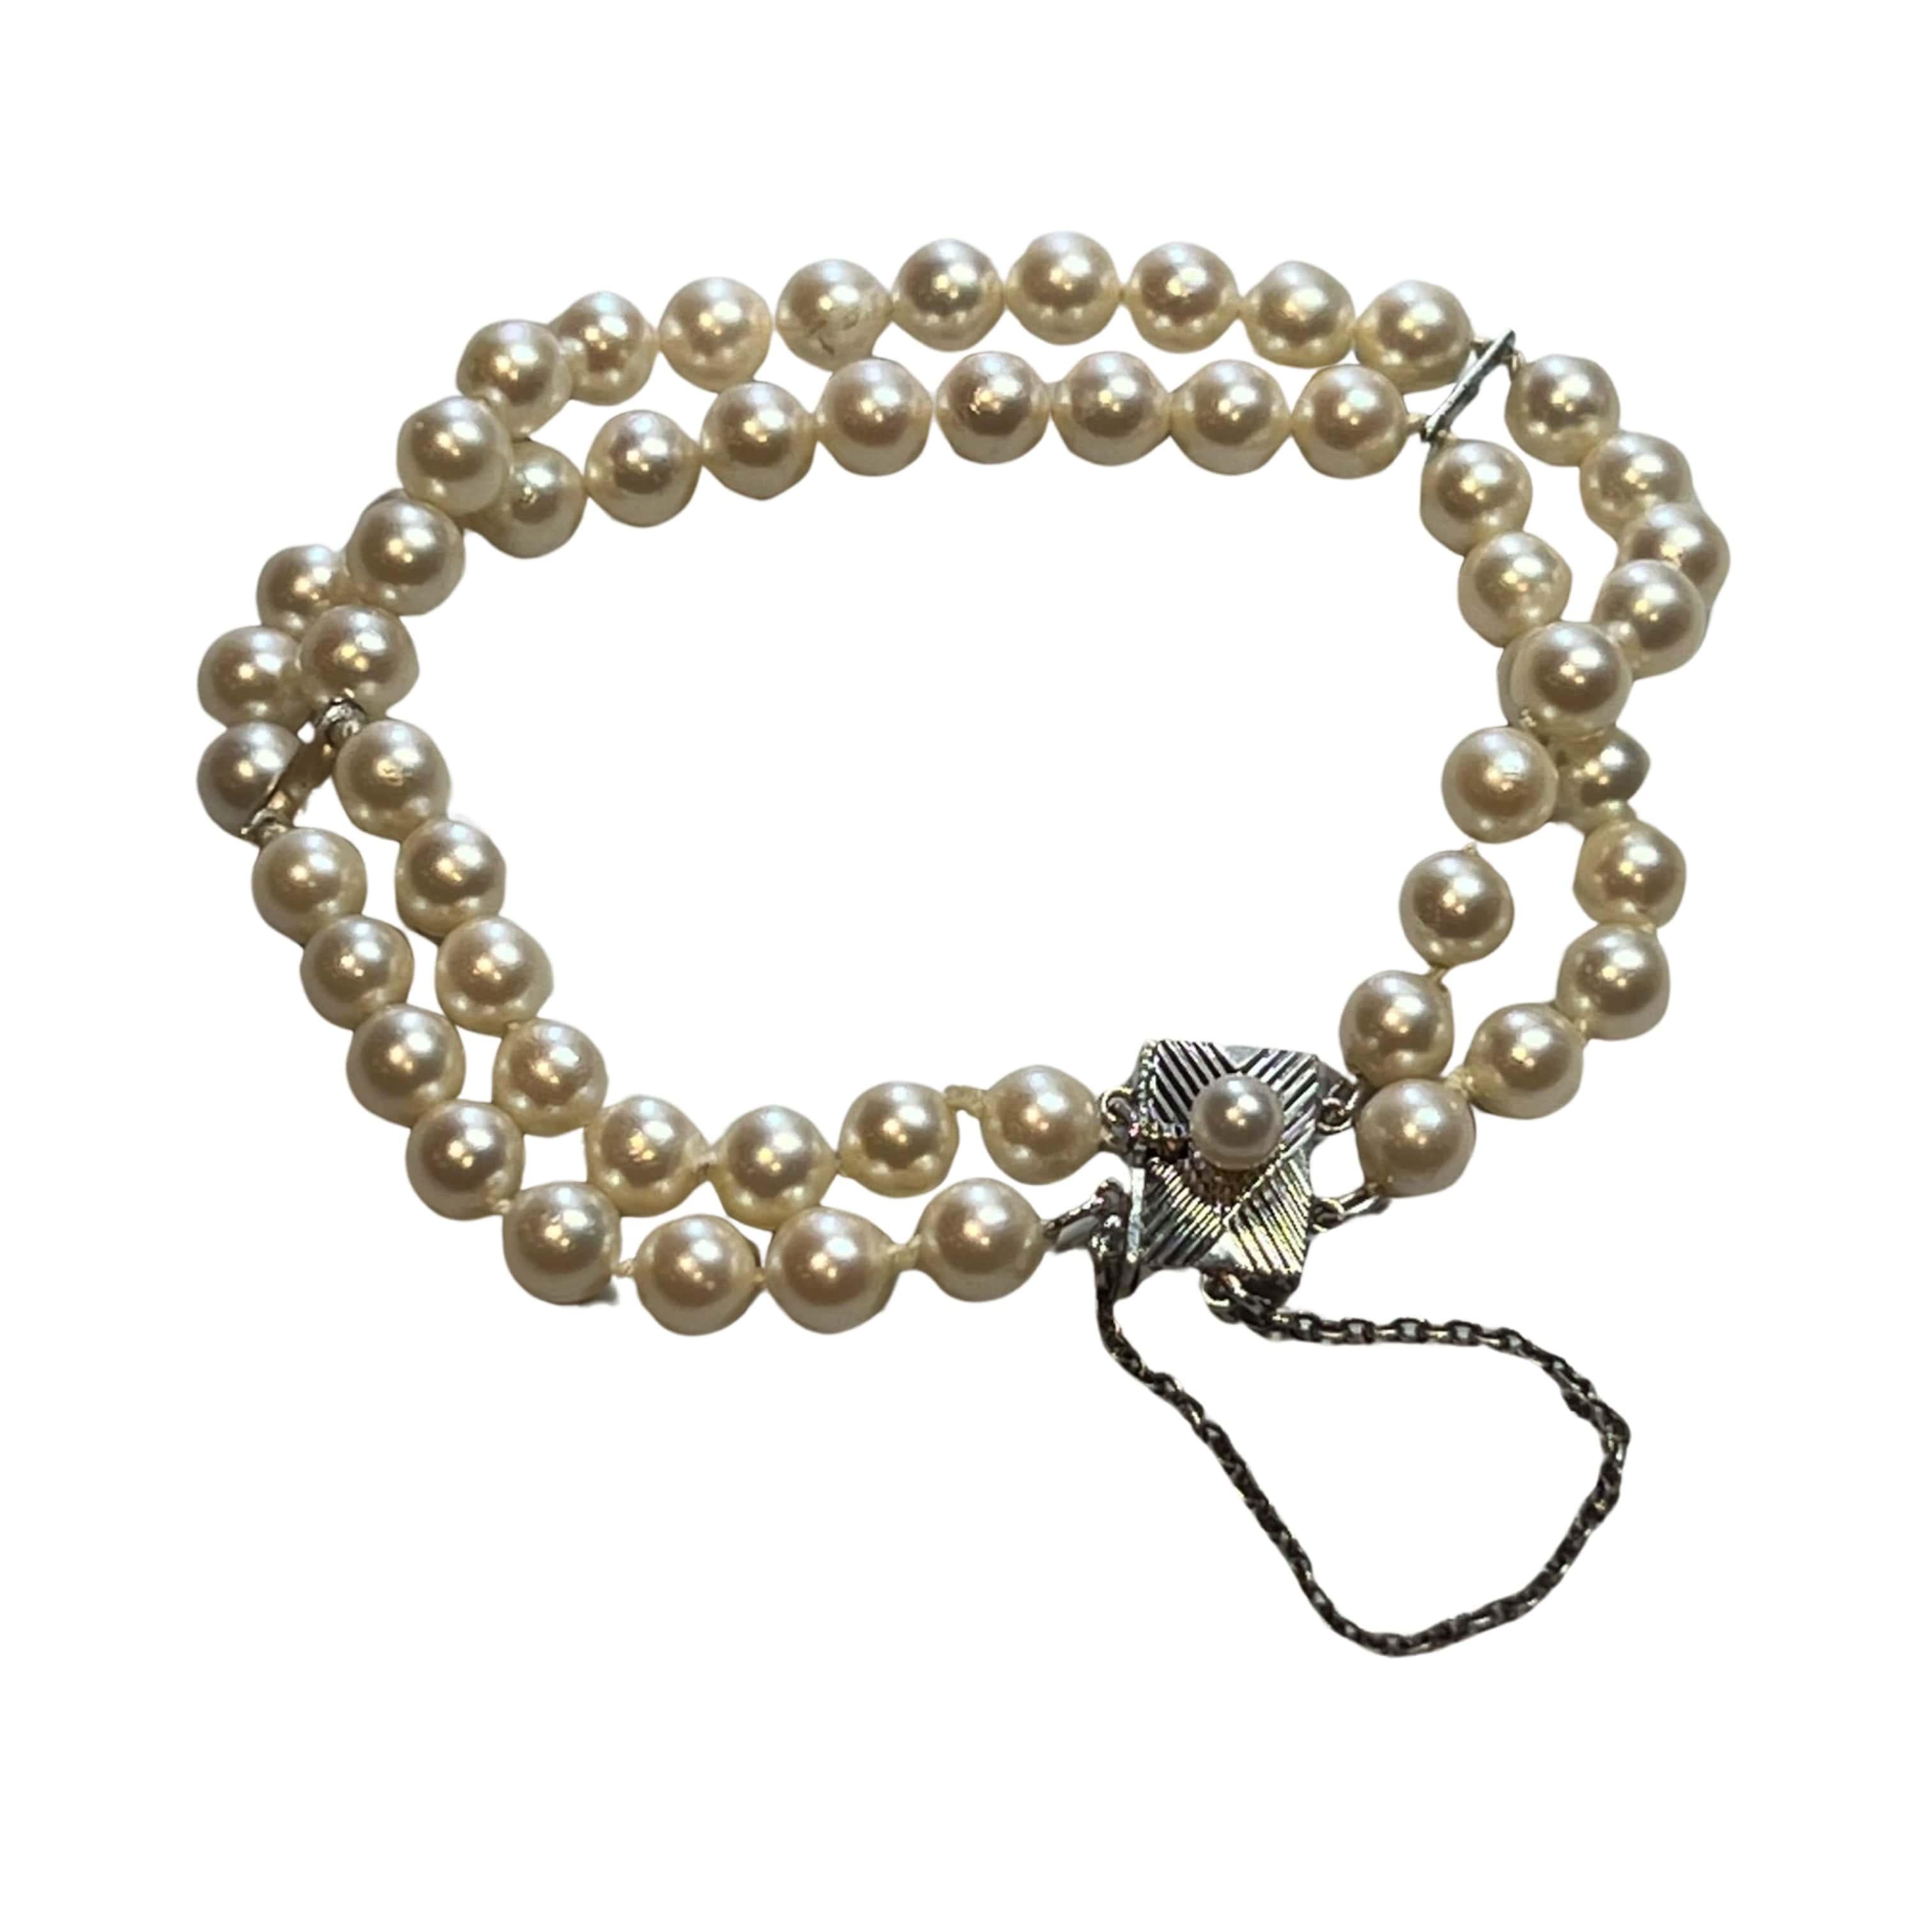 Authentic Mikimoto Estate Akoya Pearl 2 Strand Bracelet 7 5/8 inch  5.85 mm M341

Double Strand Mikimoto Japanese Akoya Pearl Bracelet

This elegant Authentic Mikimoto Estate Japanese Akoya pearl bracelet is made of Silver and has Akoya Cultured